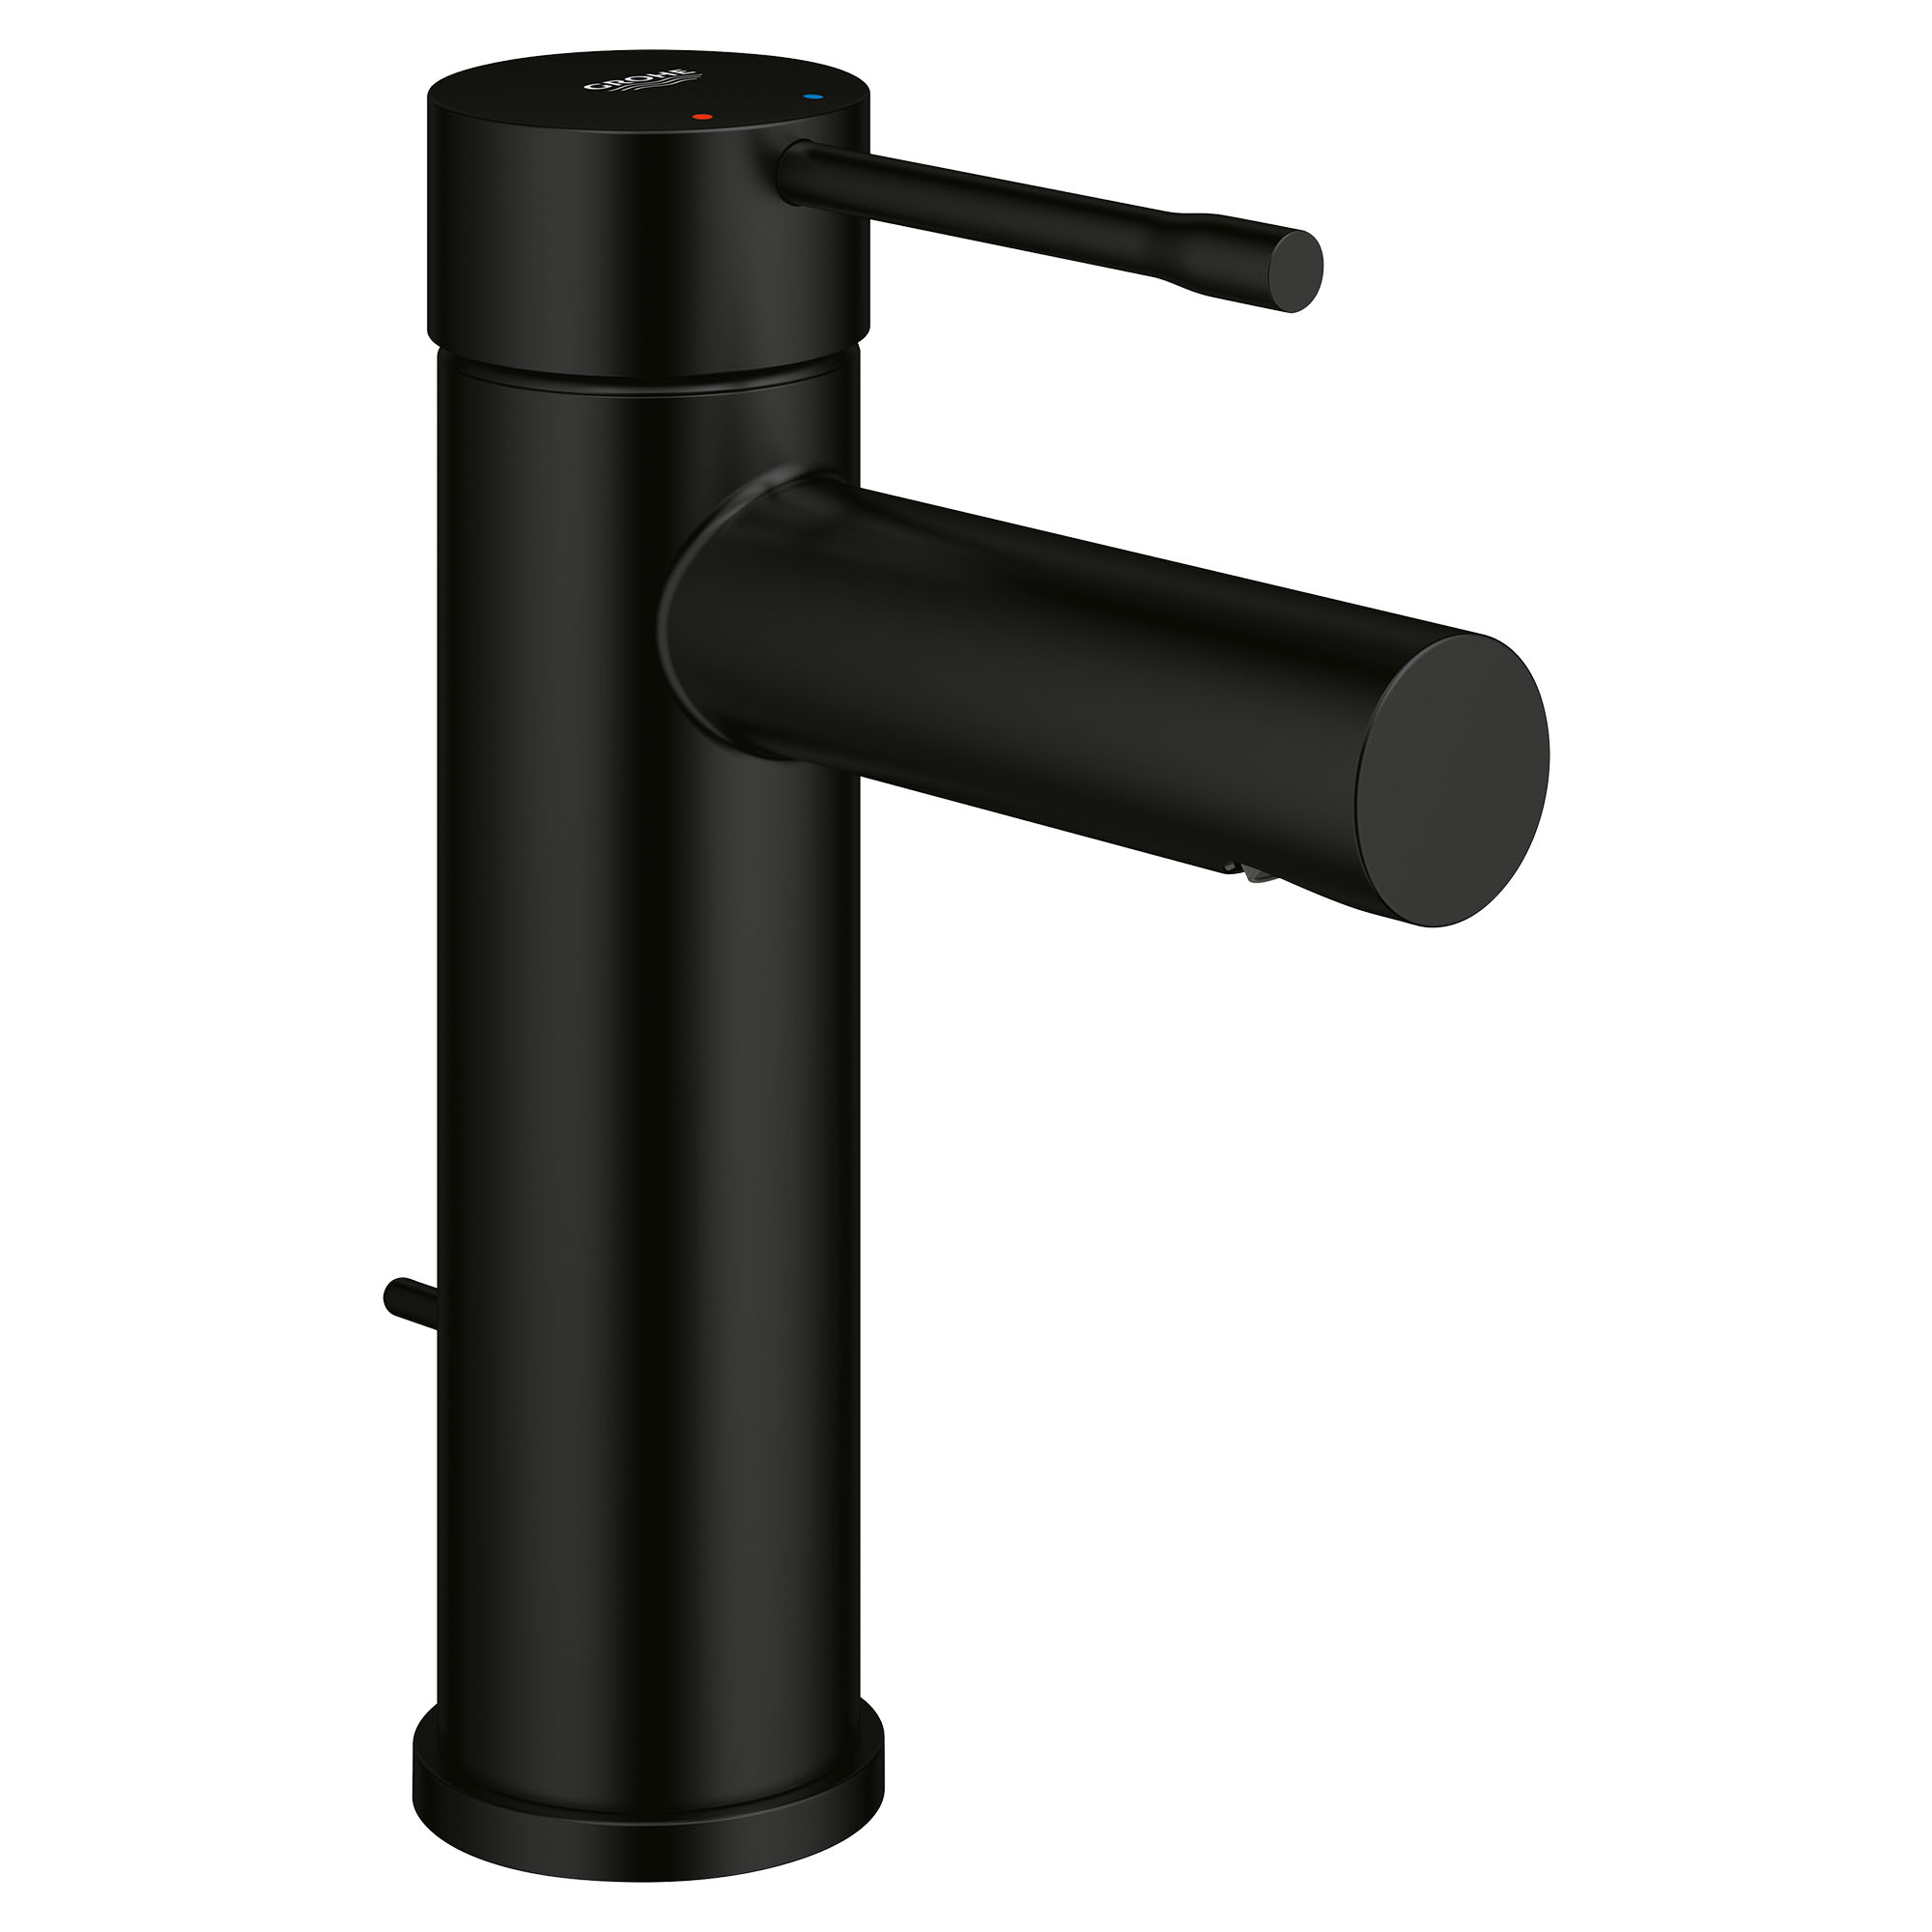 GROHE GROHE 205722431 Concetto Bathroom Faucet, X-Small, Matte Black 